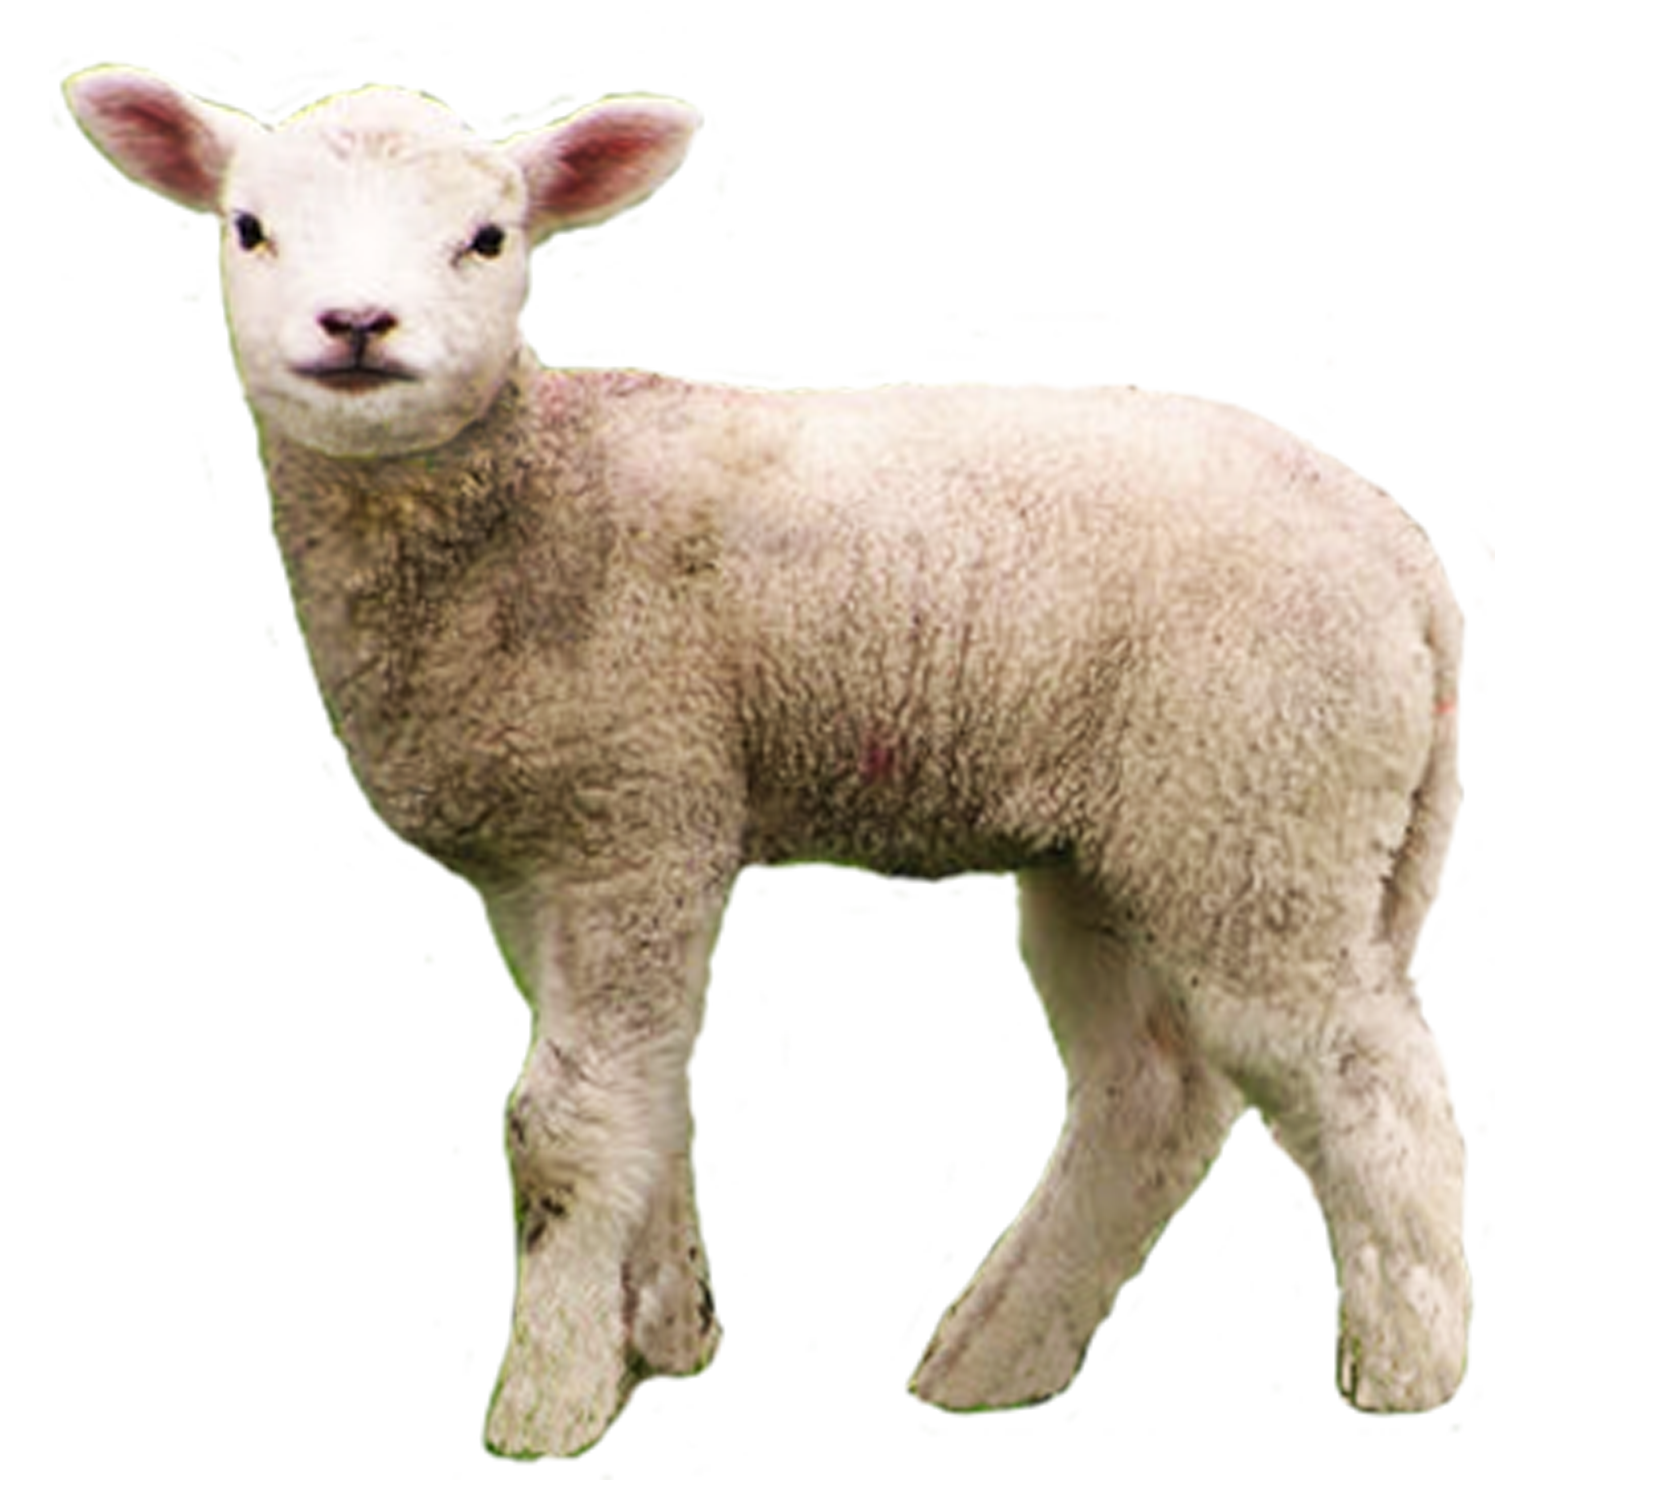 Big Gain Offers 2 Different Options For Lambs From Birth To 40 Days Of Age (Approximetly 10 40 Pounds). - Baby Lamb, Transparent background PNG HD thumbnail